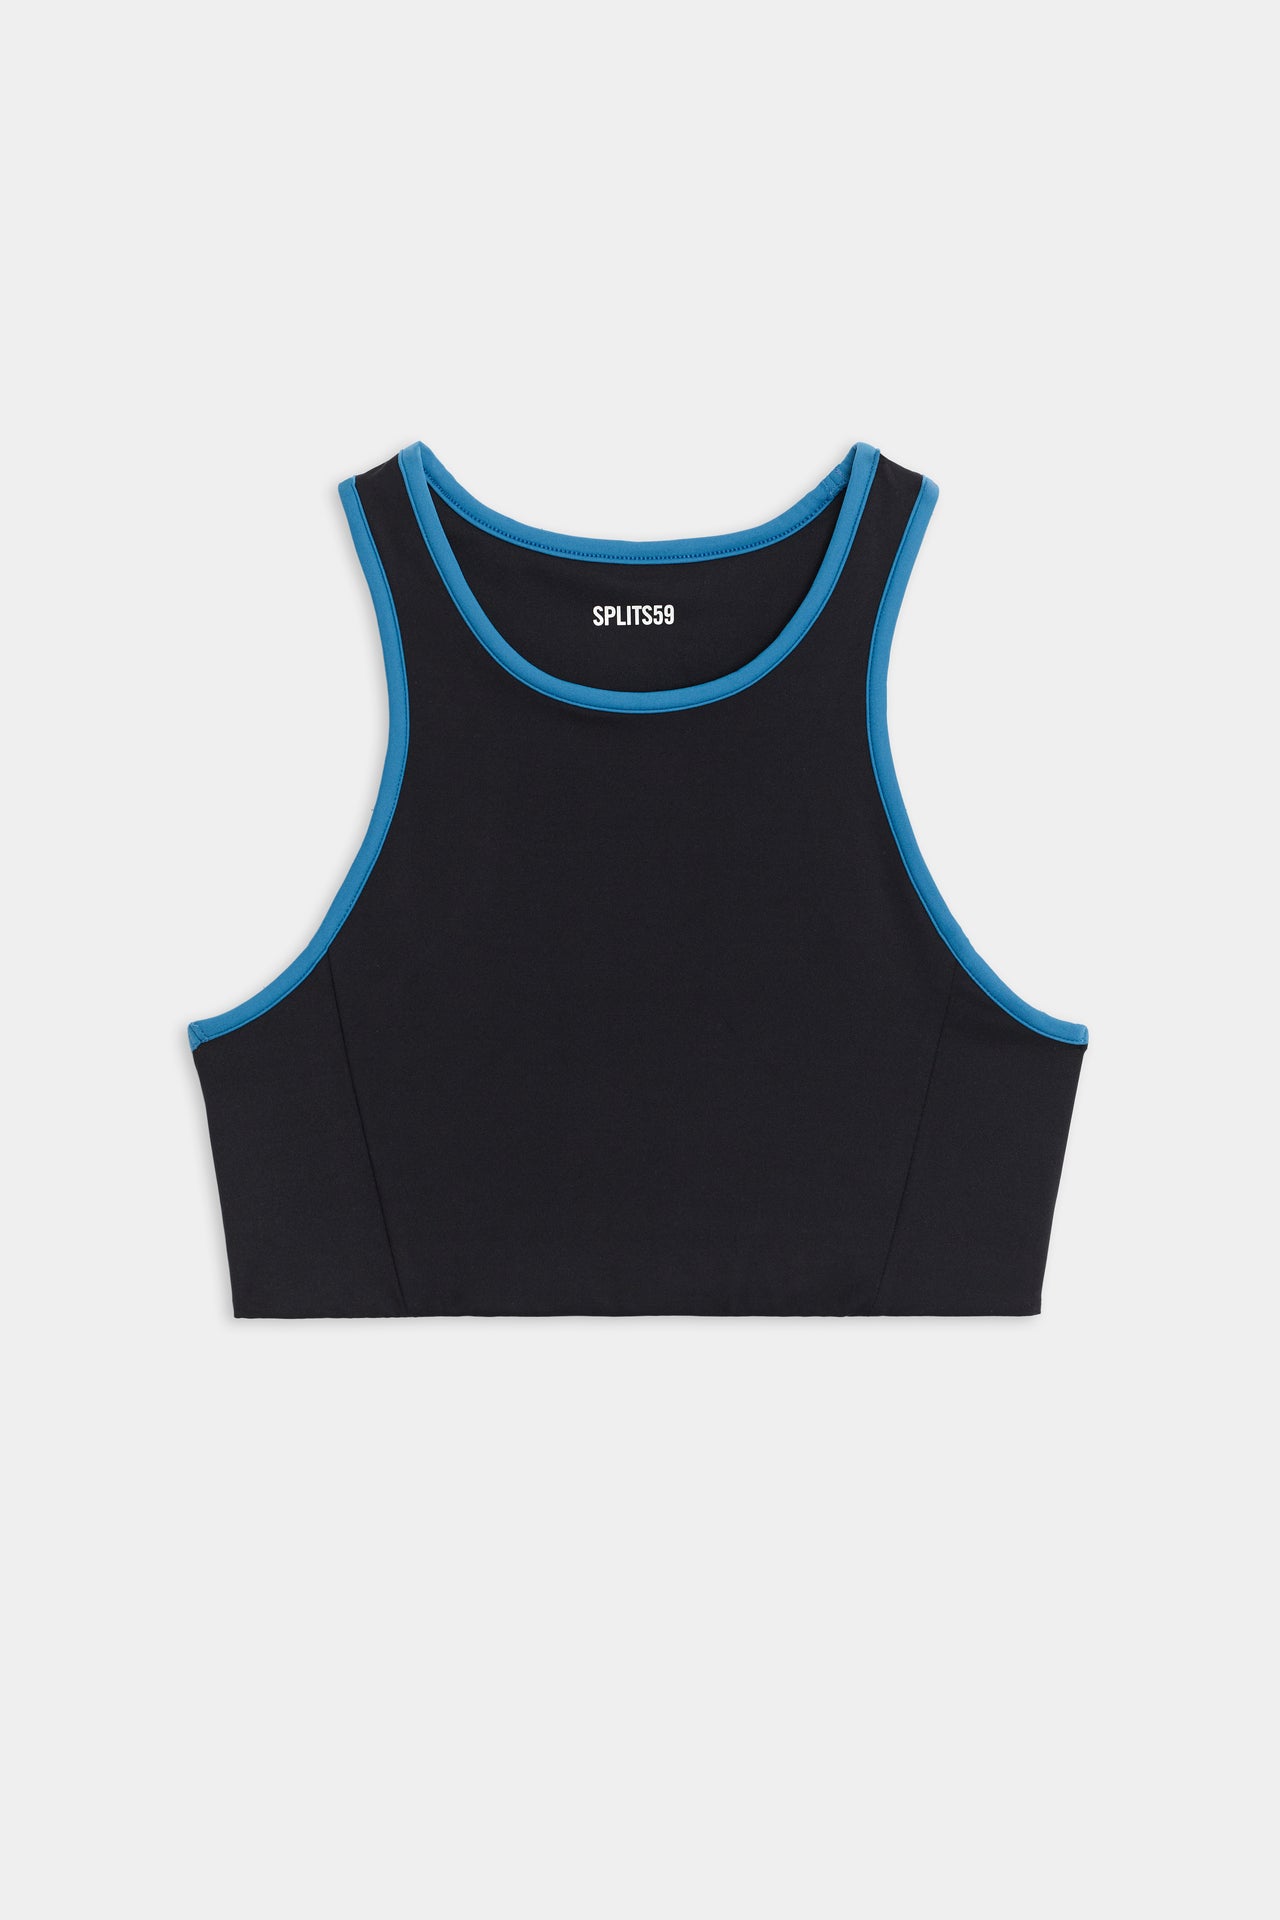 Flat view of black sports bra with blue hem around neck and arms